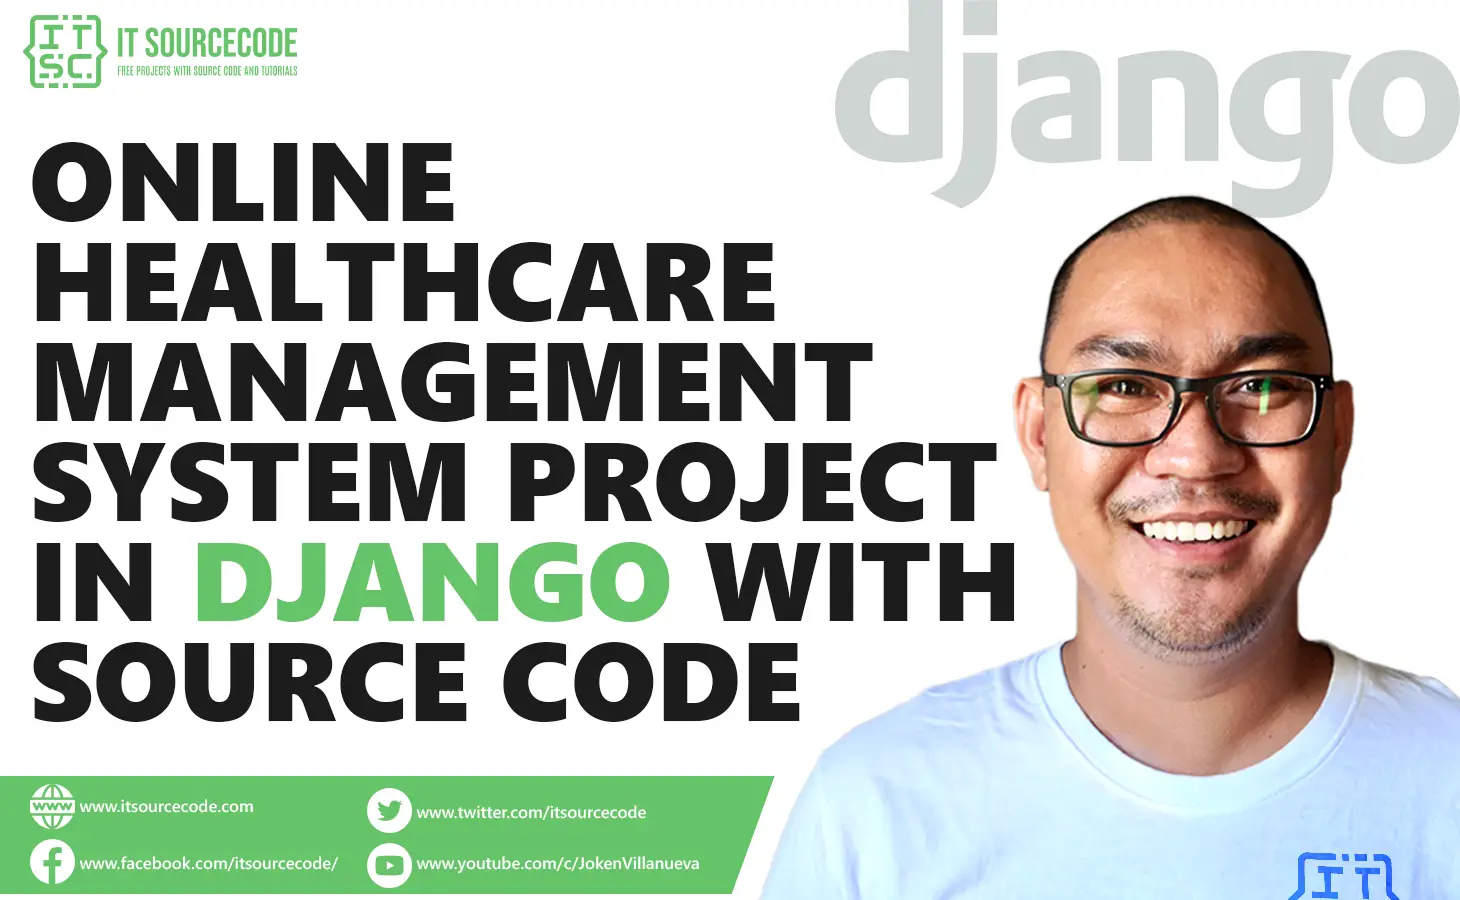 Online Healthcare Management System Project in Django with Source Code